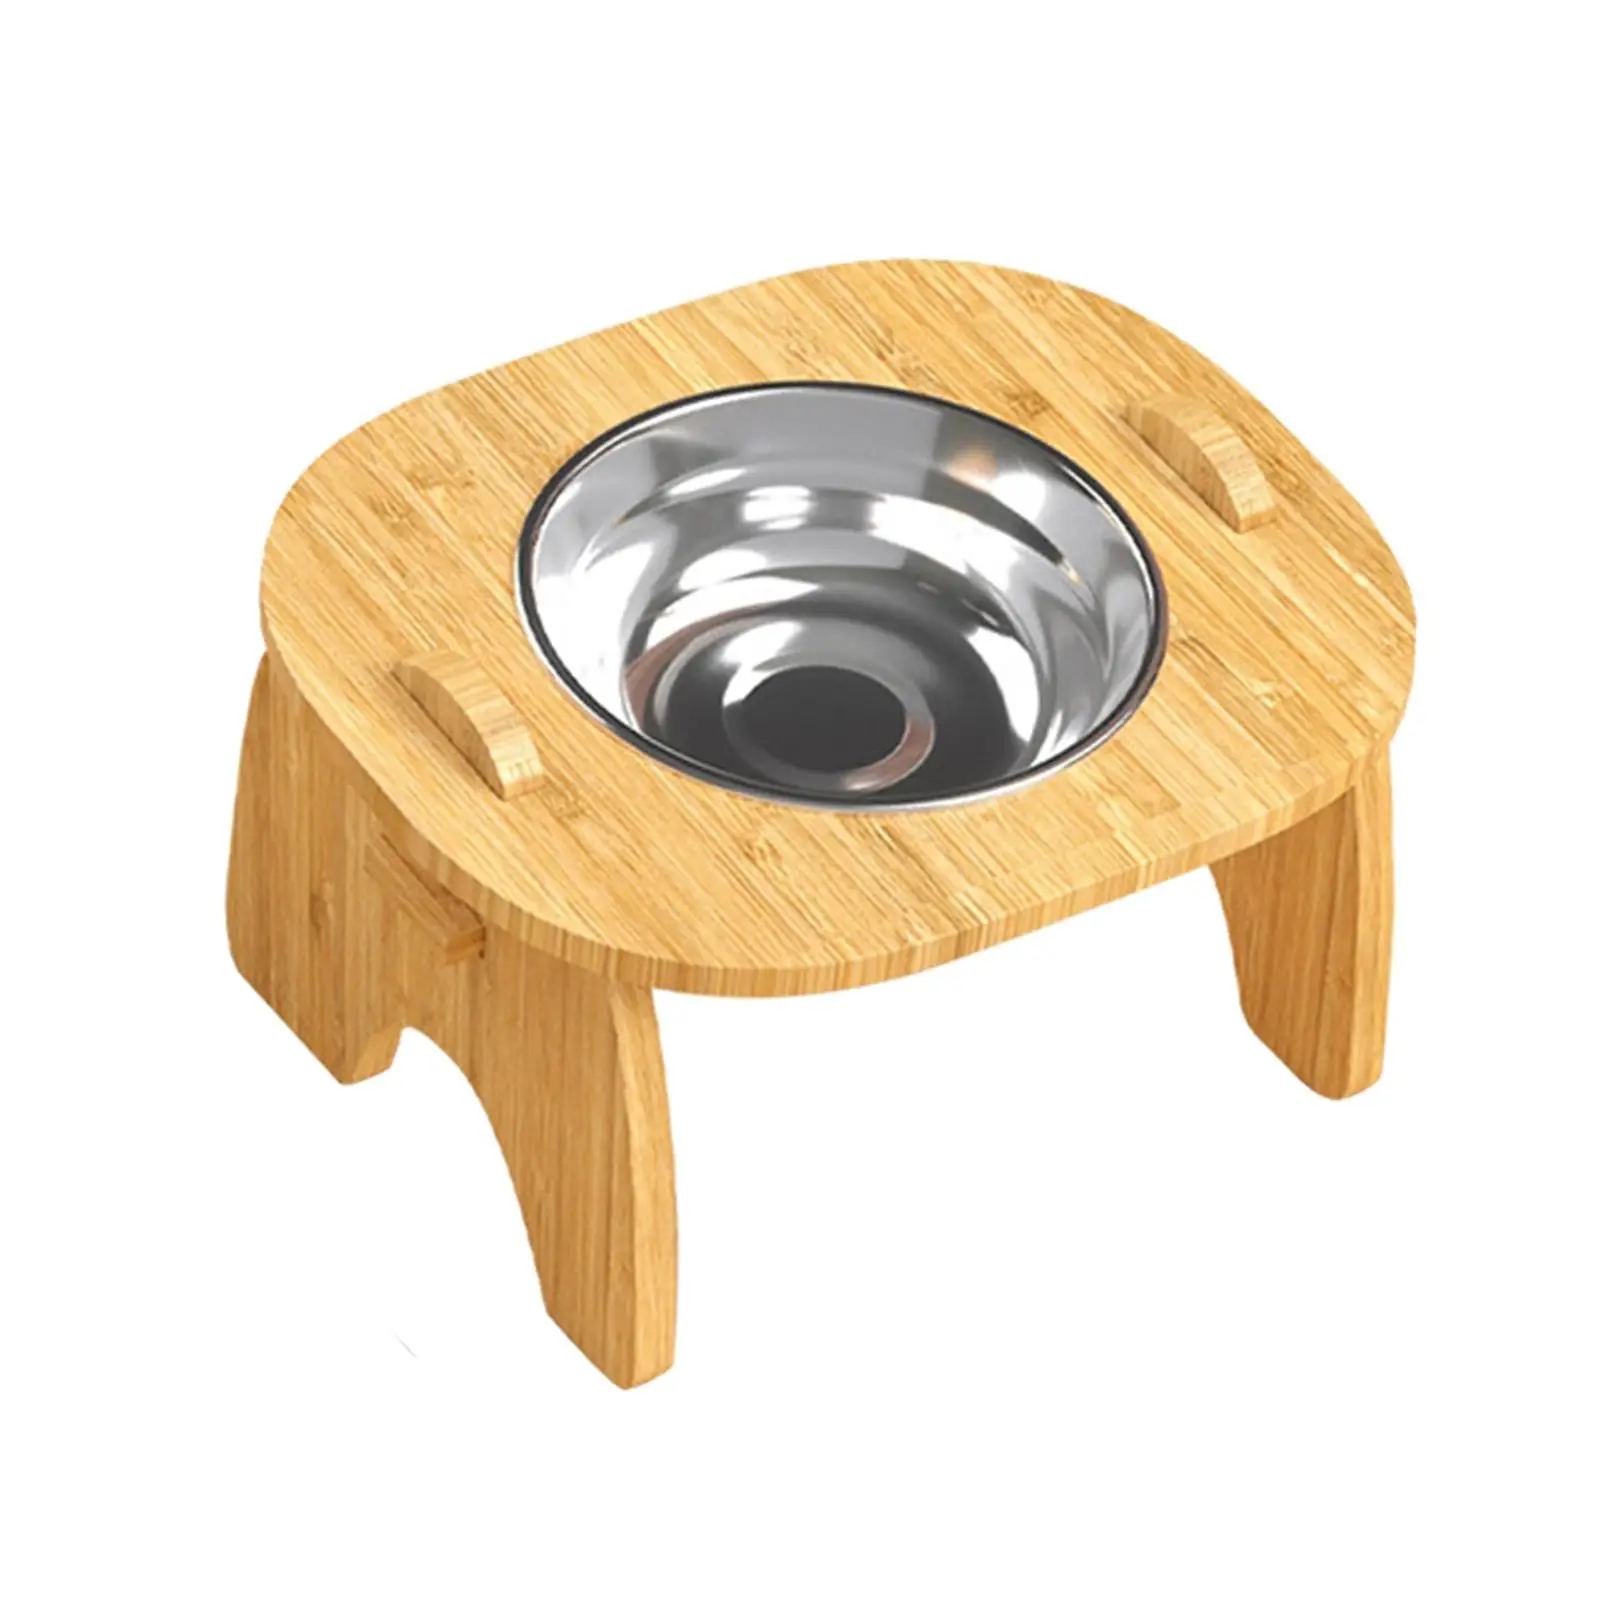 Elevated Pet Bowls Lightweight Kitty Drinking Bowl Raised Cat Feeder Cat Bowls Food Feeding Bowl for Small Medium Large Dogs